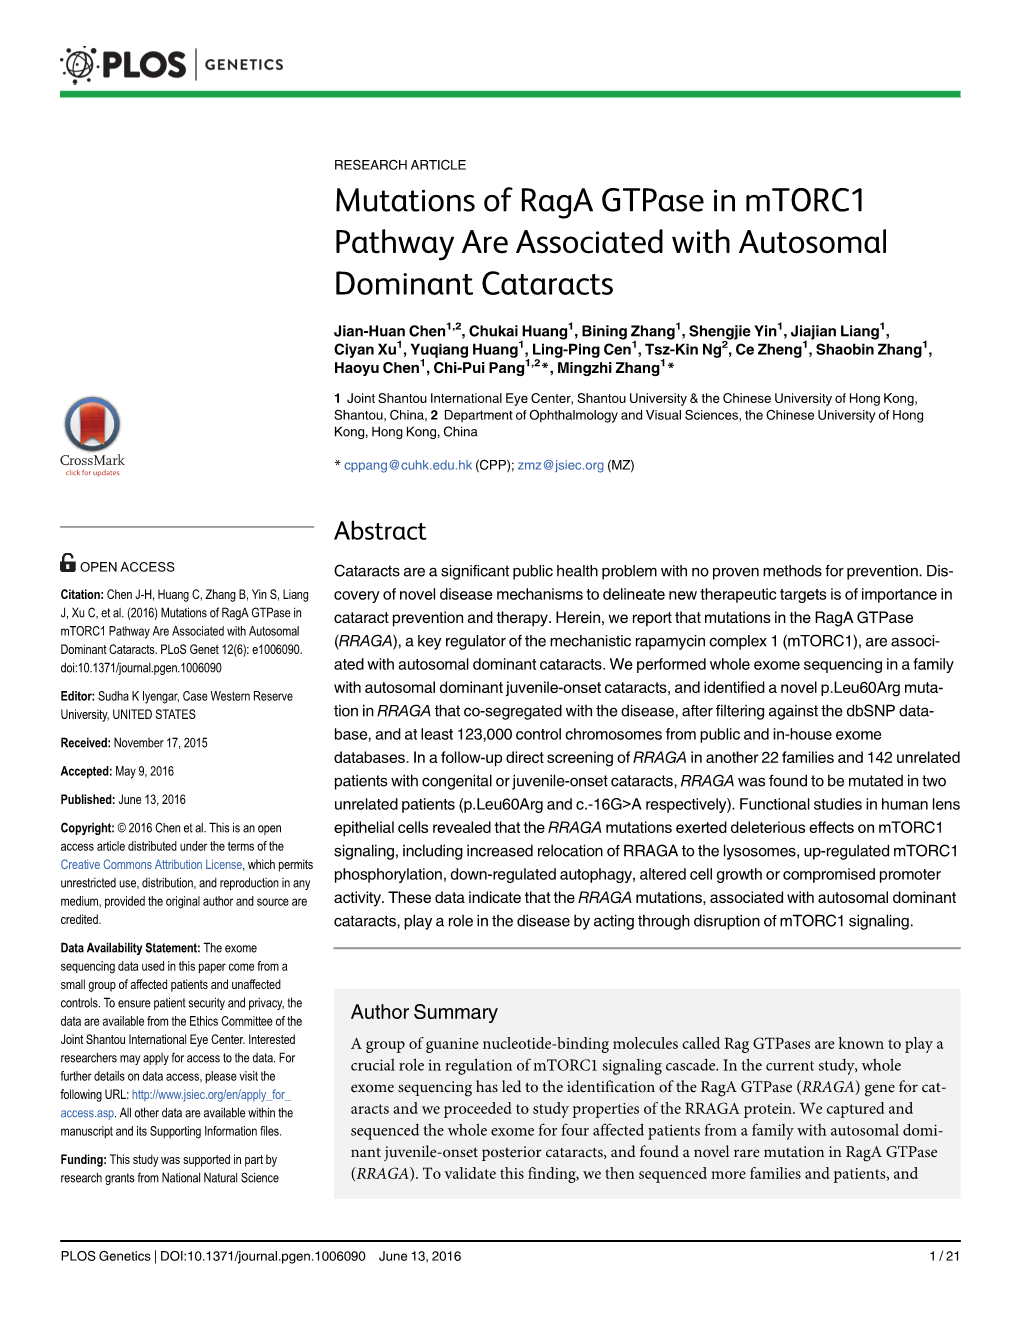 Mutations of Raga Gtpase in Mtorc1 Pathway Are Associated with Autosomal Dominant Cataracts